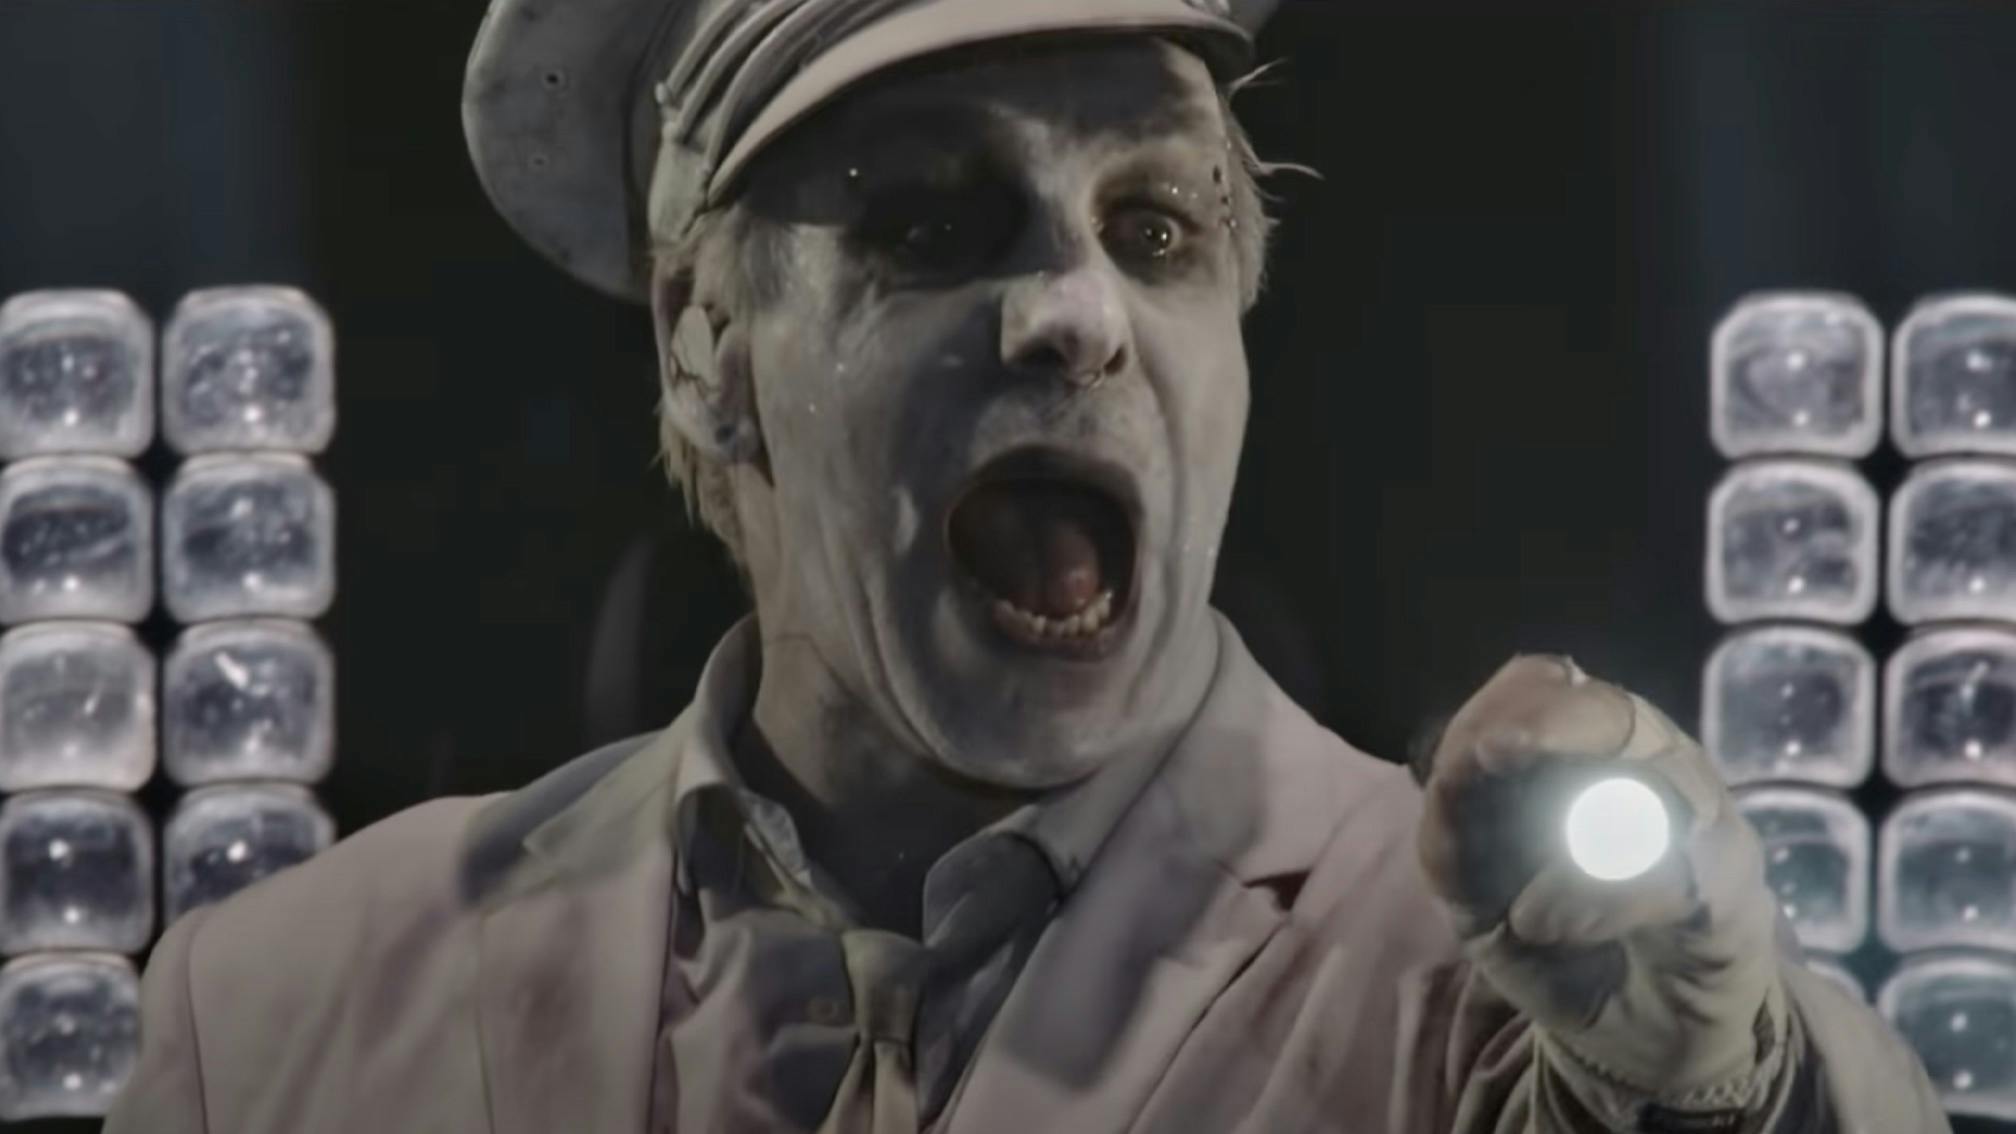 Watch Lindemann's wild and messy performance of Allesfresser live in Moscow